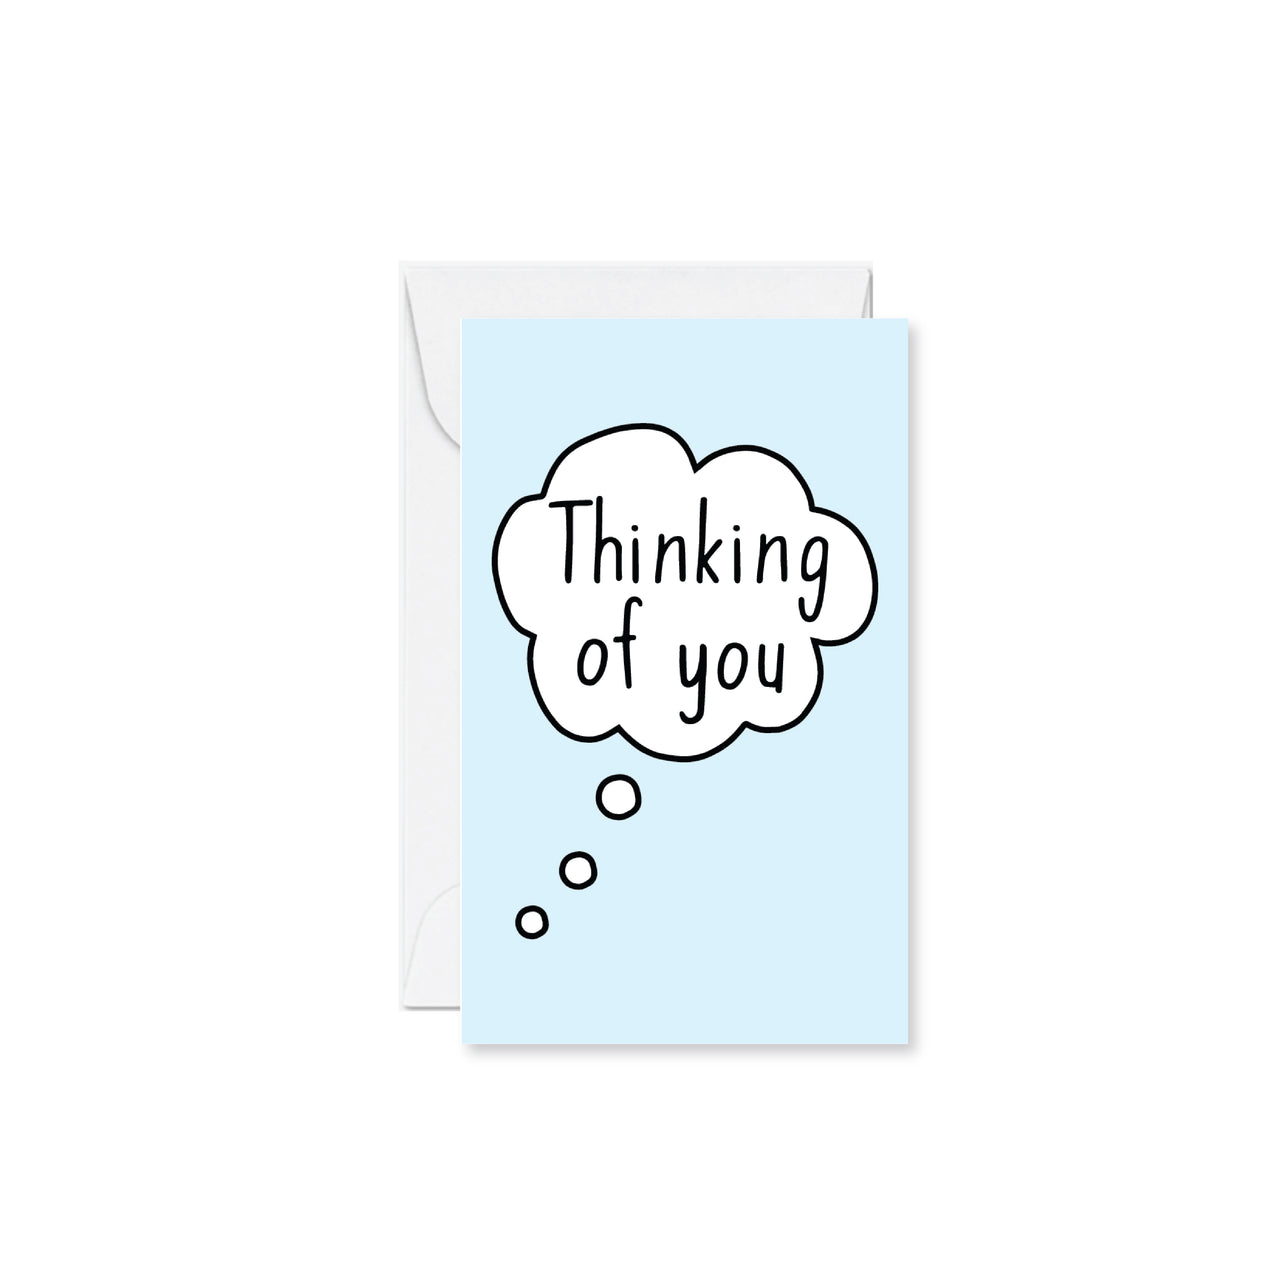 Thinking of you Mini Card